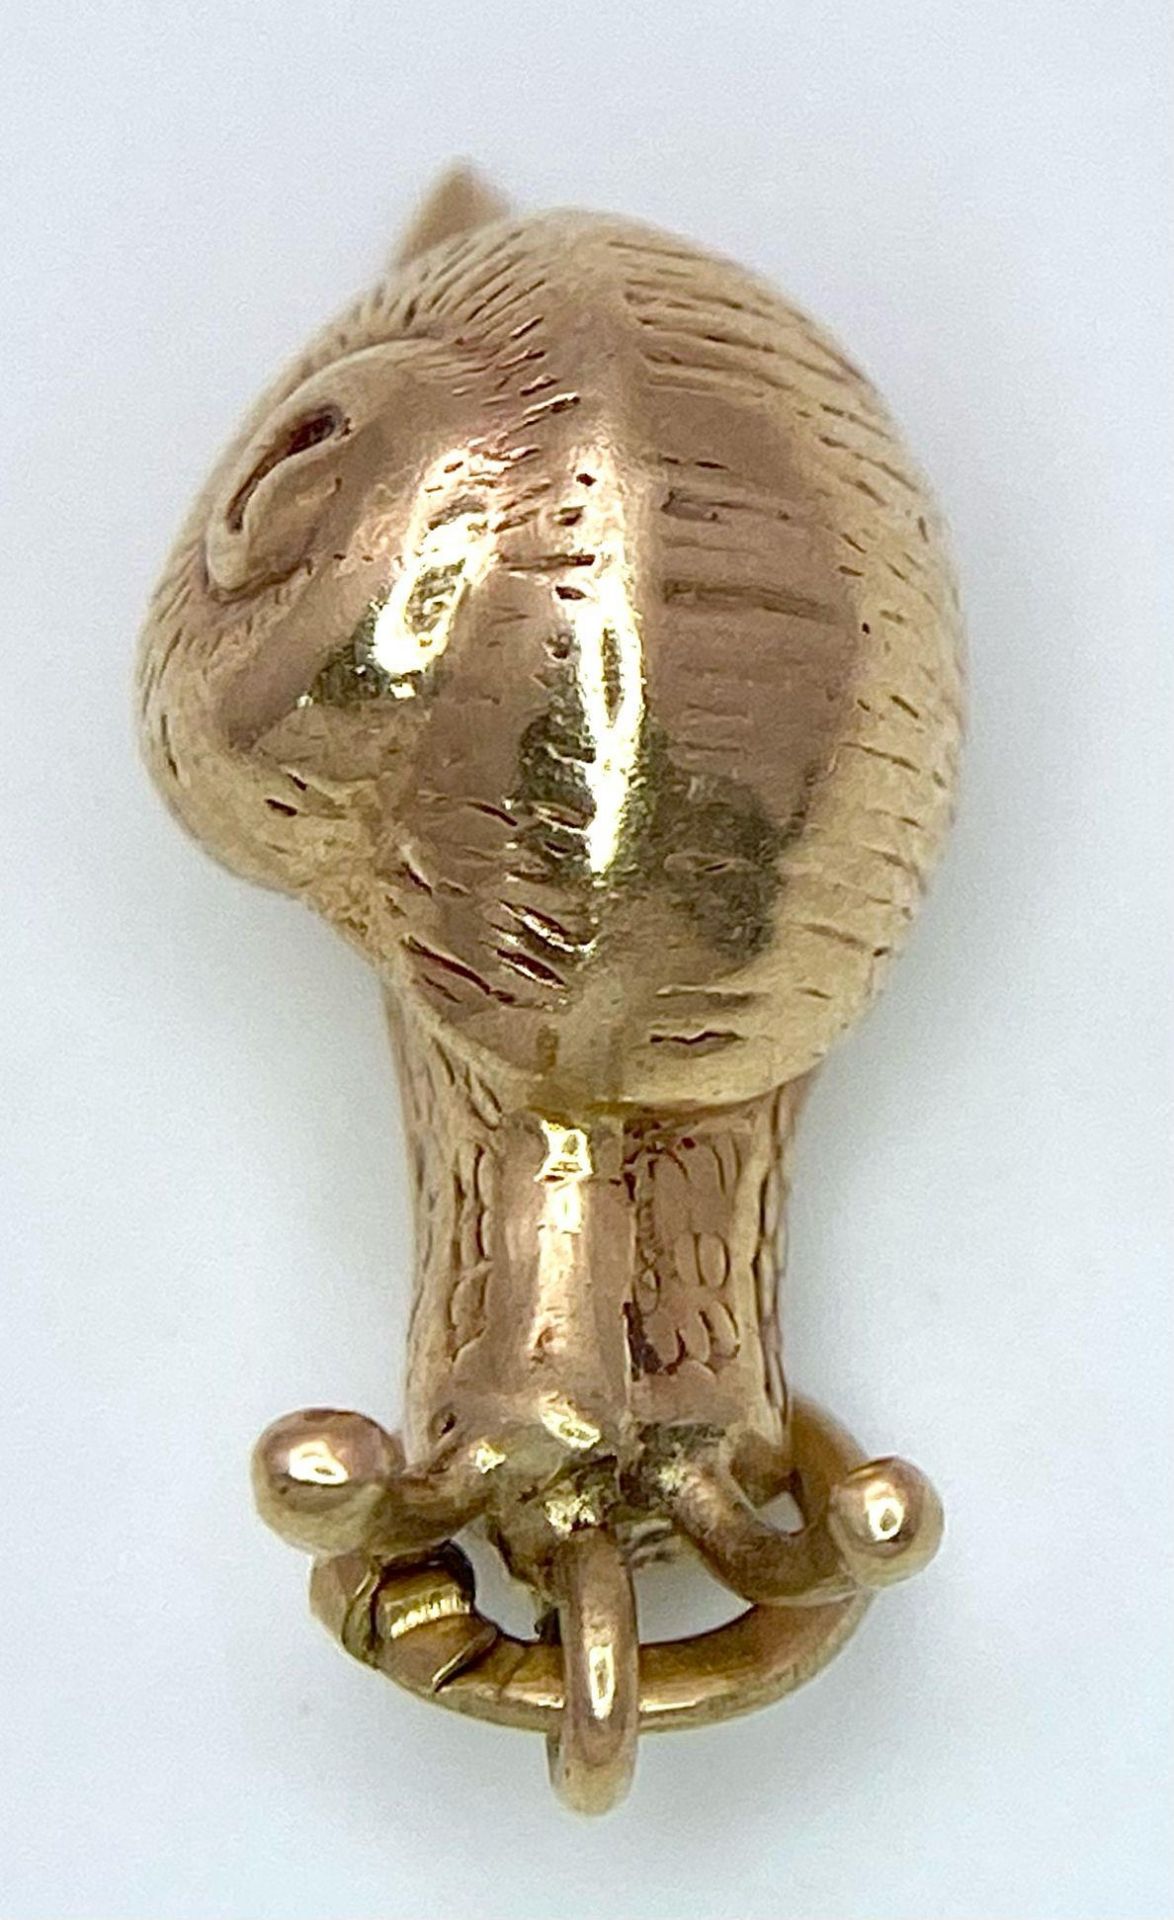 A 9K YELLOW GOLD SNAIL CHARM. TOTAL WEIGHT 0.8G - Image 3 of 4